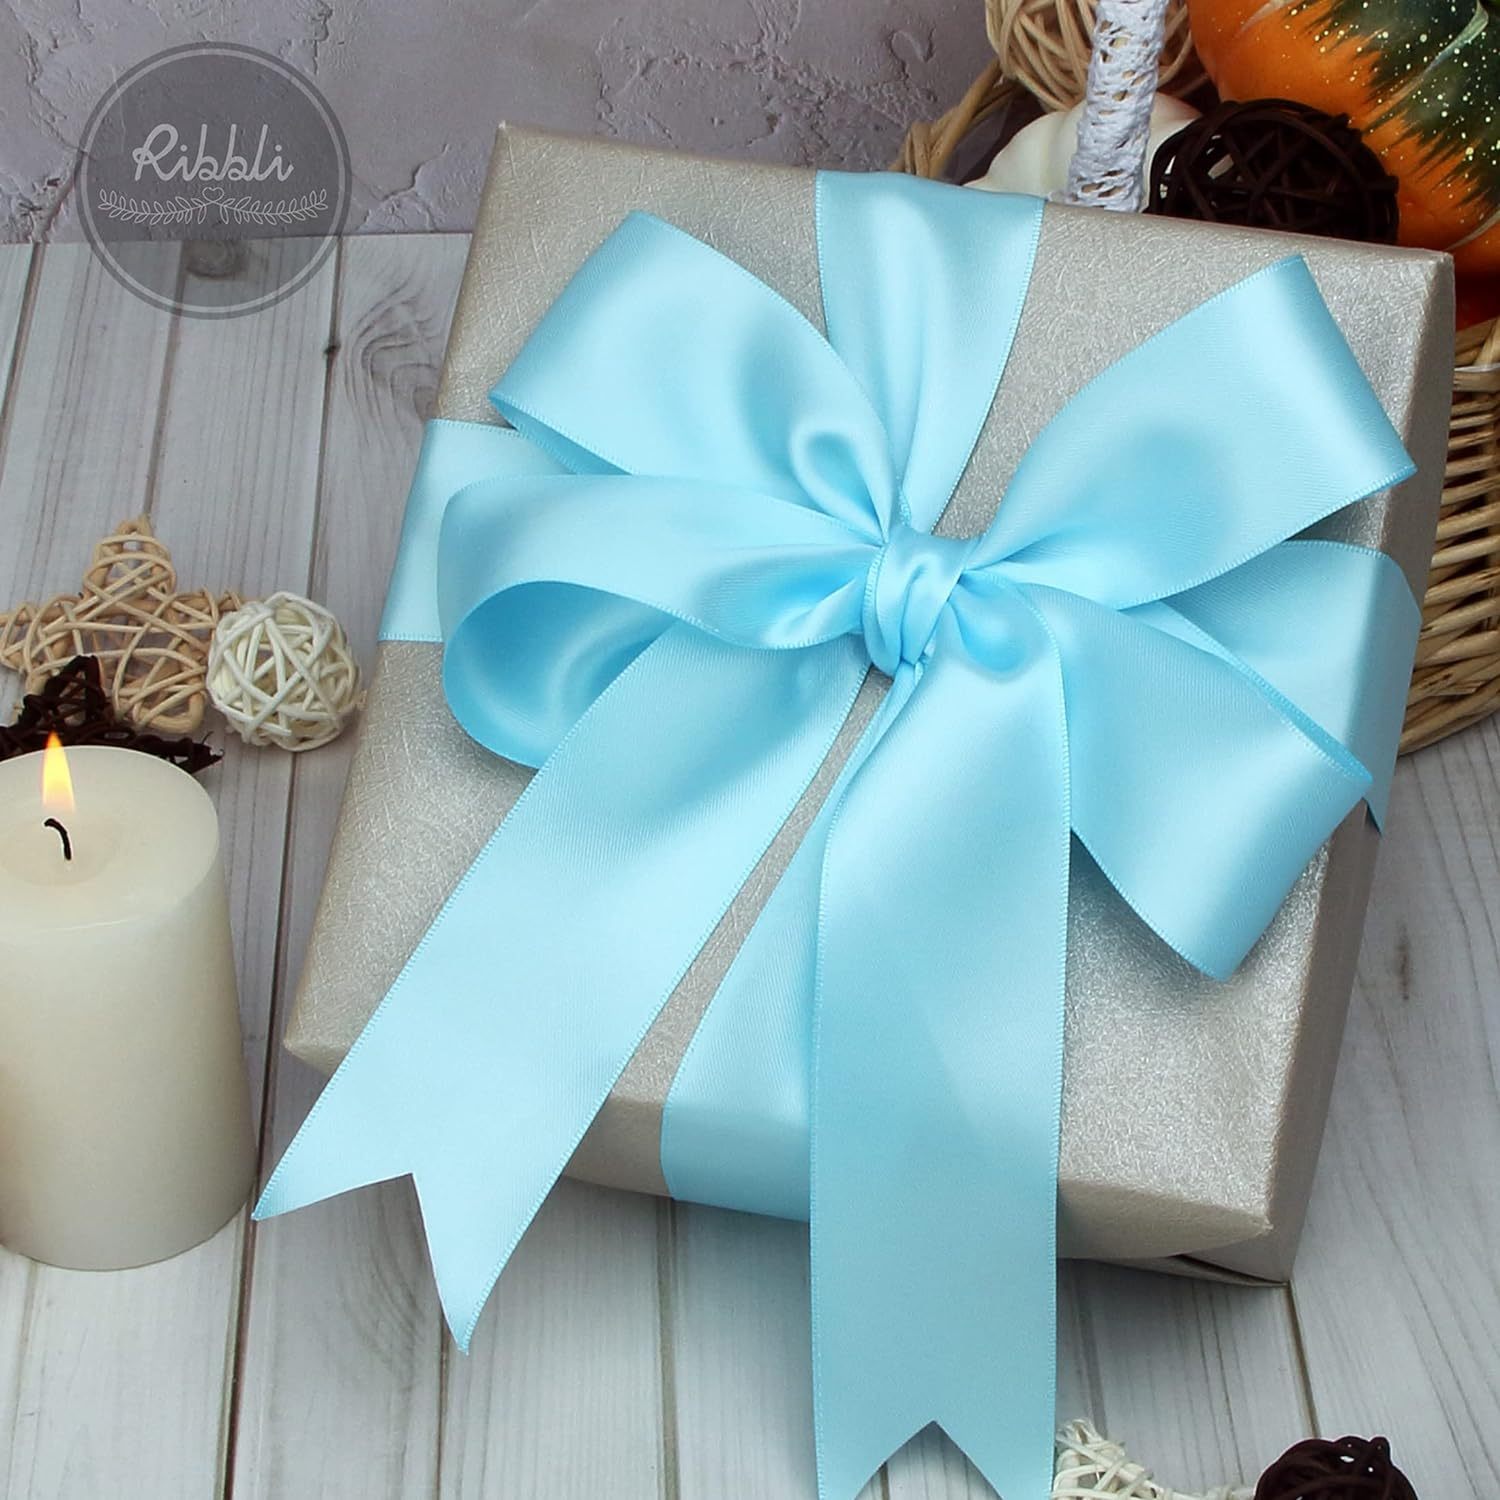 Light Blue Ribbon 1 inch x 25 Yards, Baby Blue Satin Fabric Silk Ribbon for Gift Wrapping, Bows Making, Floral Bouquets, Wreaths, DIY Handicrafts